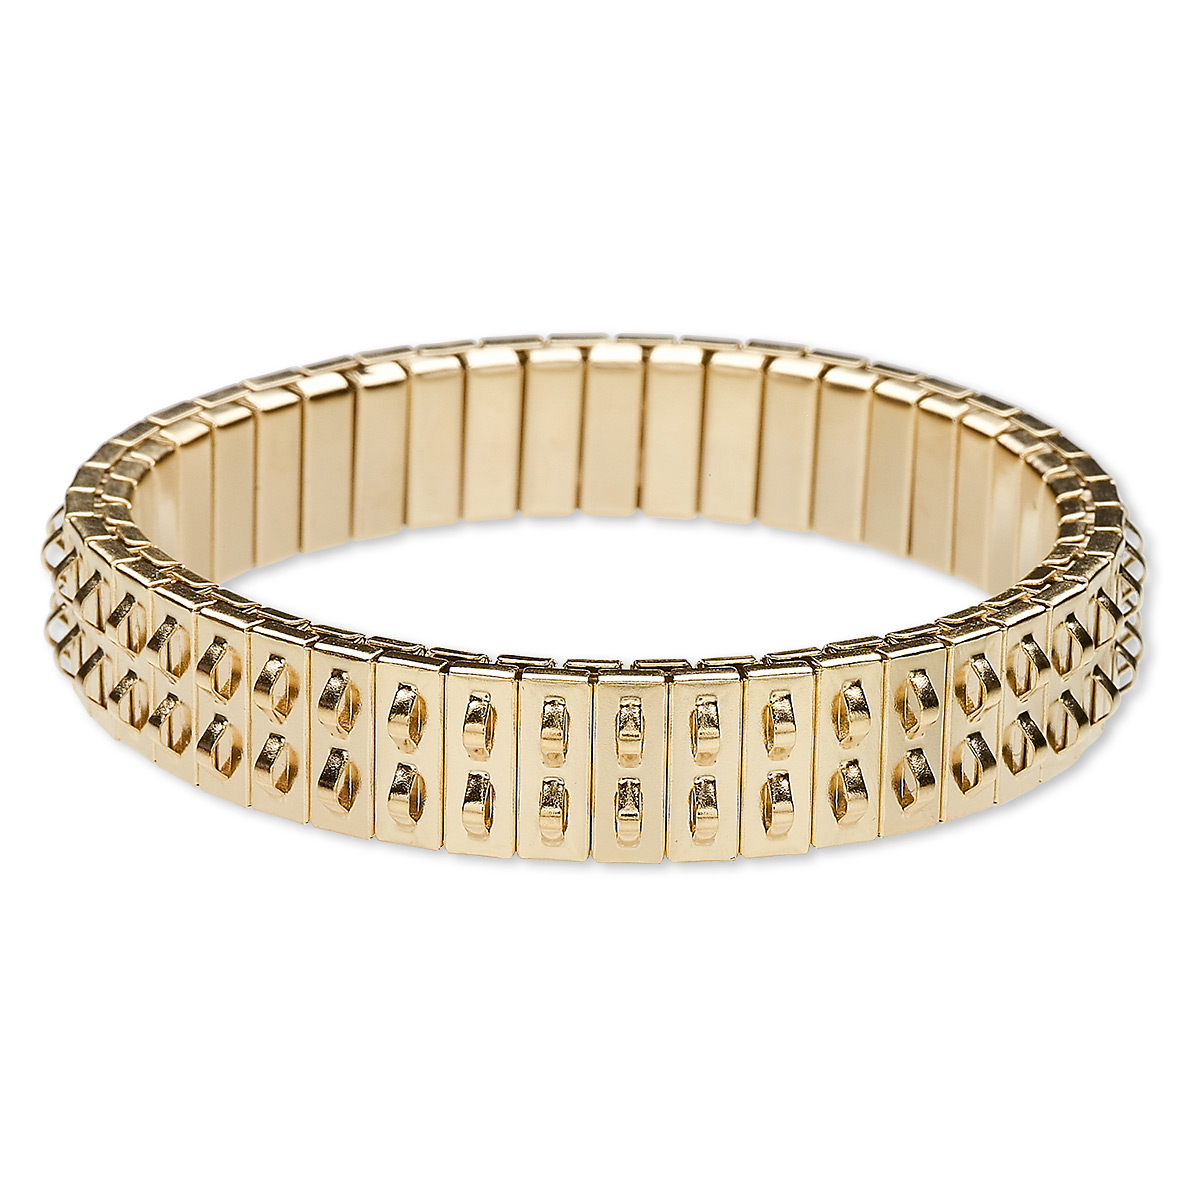 Bracelet component, stretch, gold-plated stainless steel, 11mm wide cha ...